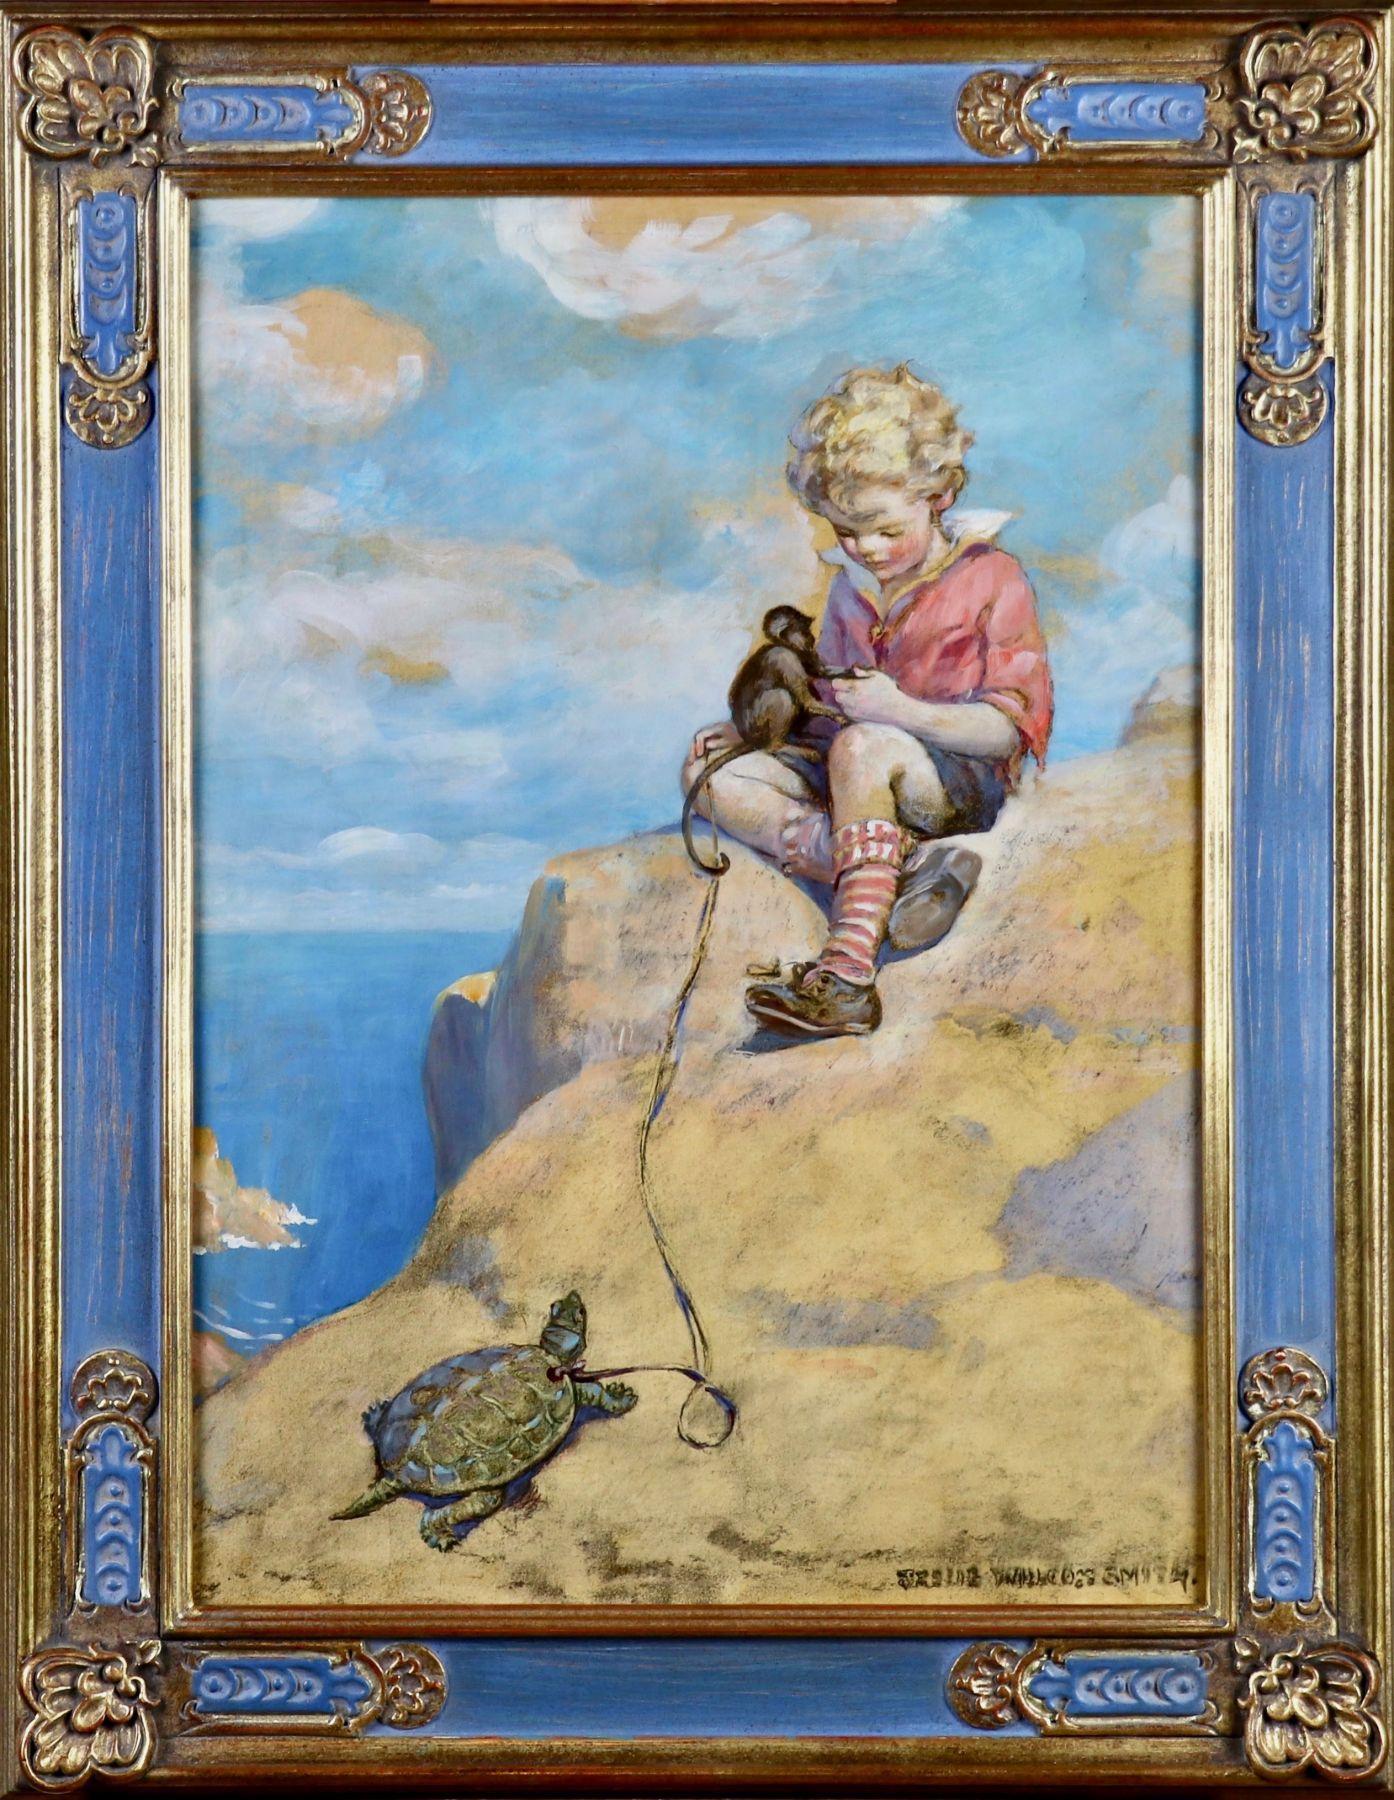 Bobs, King of the Fortunate Isle - Painting by Jessie Willcox Smith